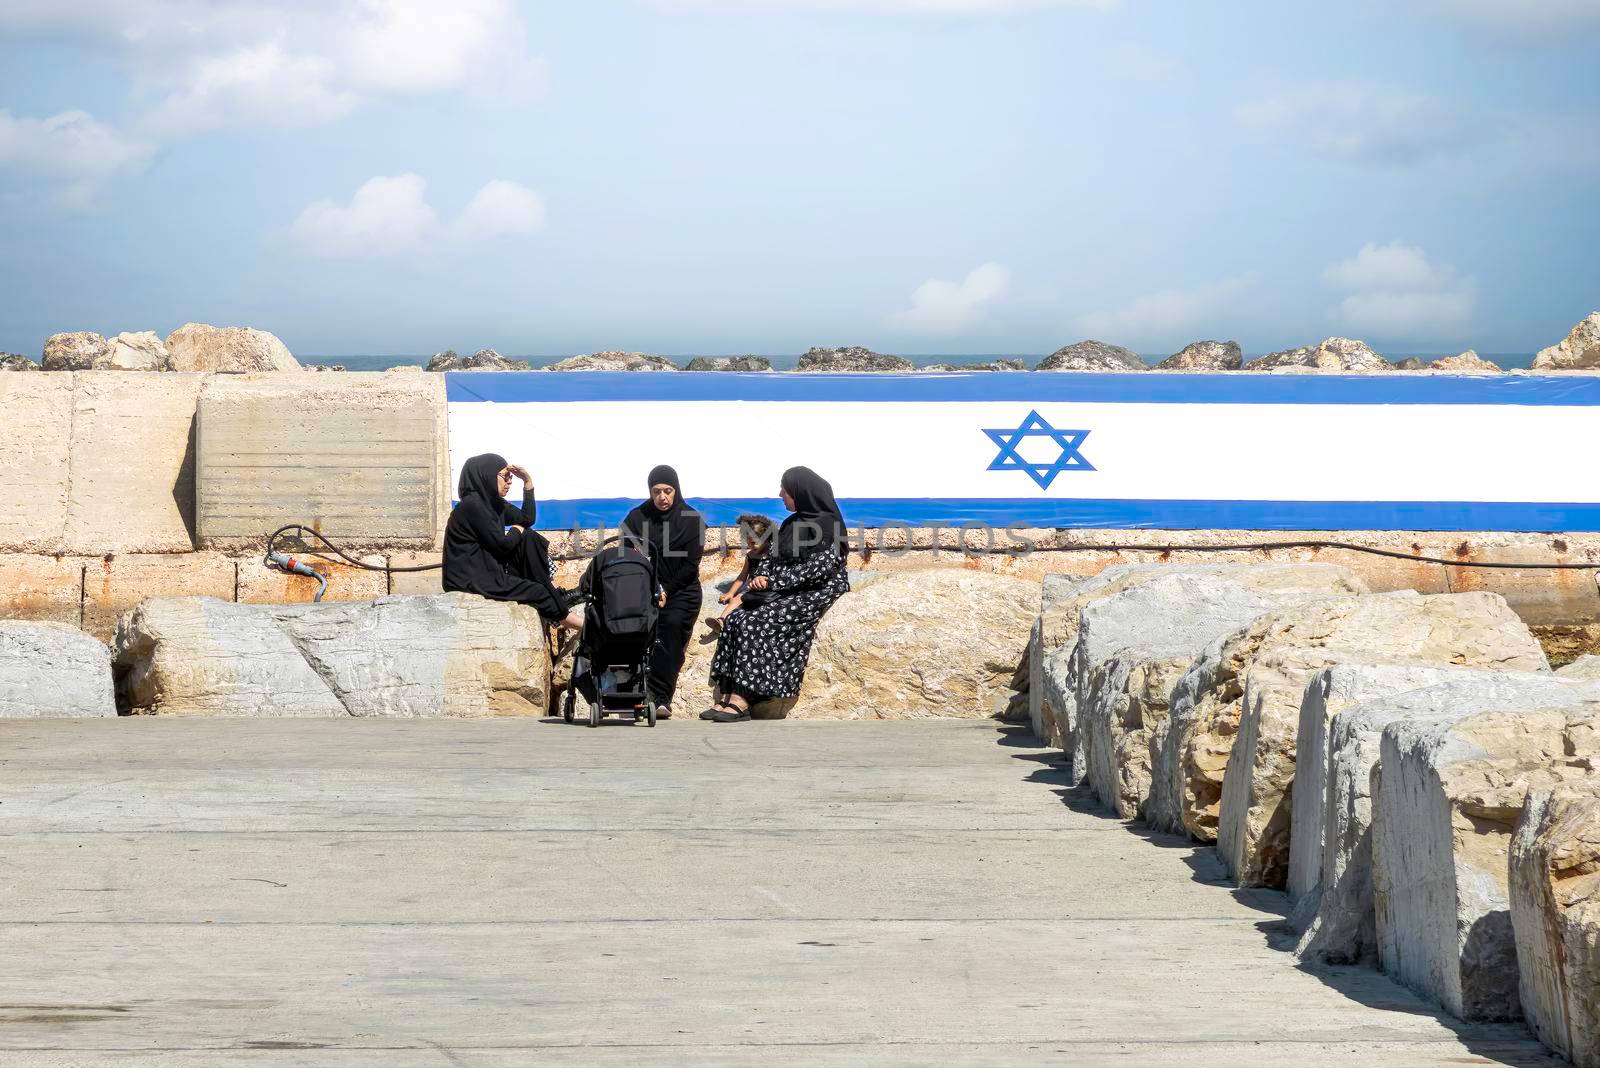 Arab women with Chador, sitting in the port of Old Jaffa with the Israeli flag in the background. The concept for peace. High quality photo